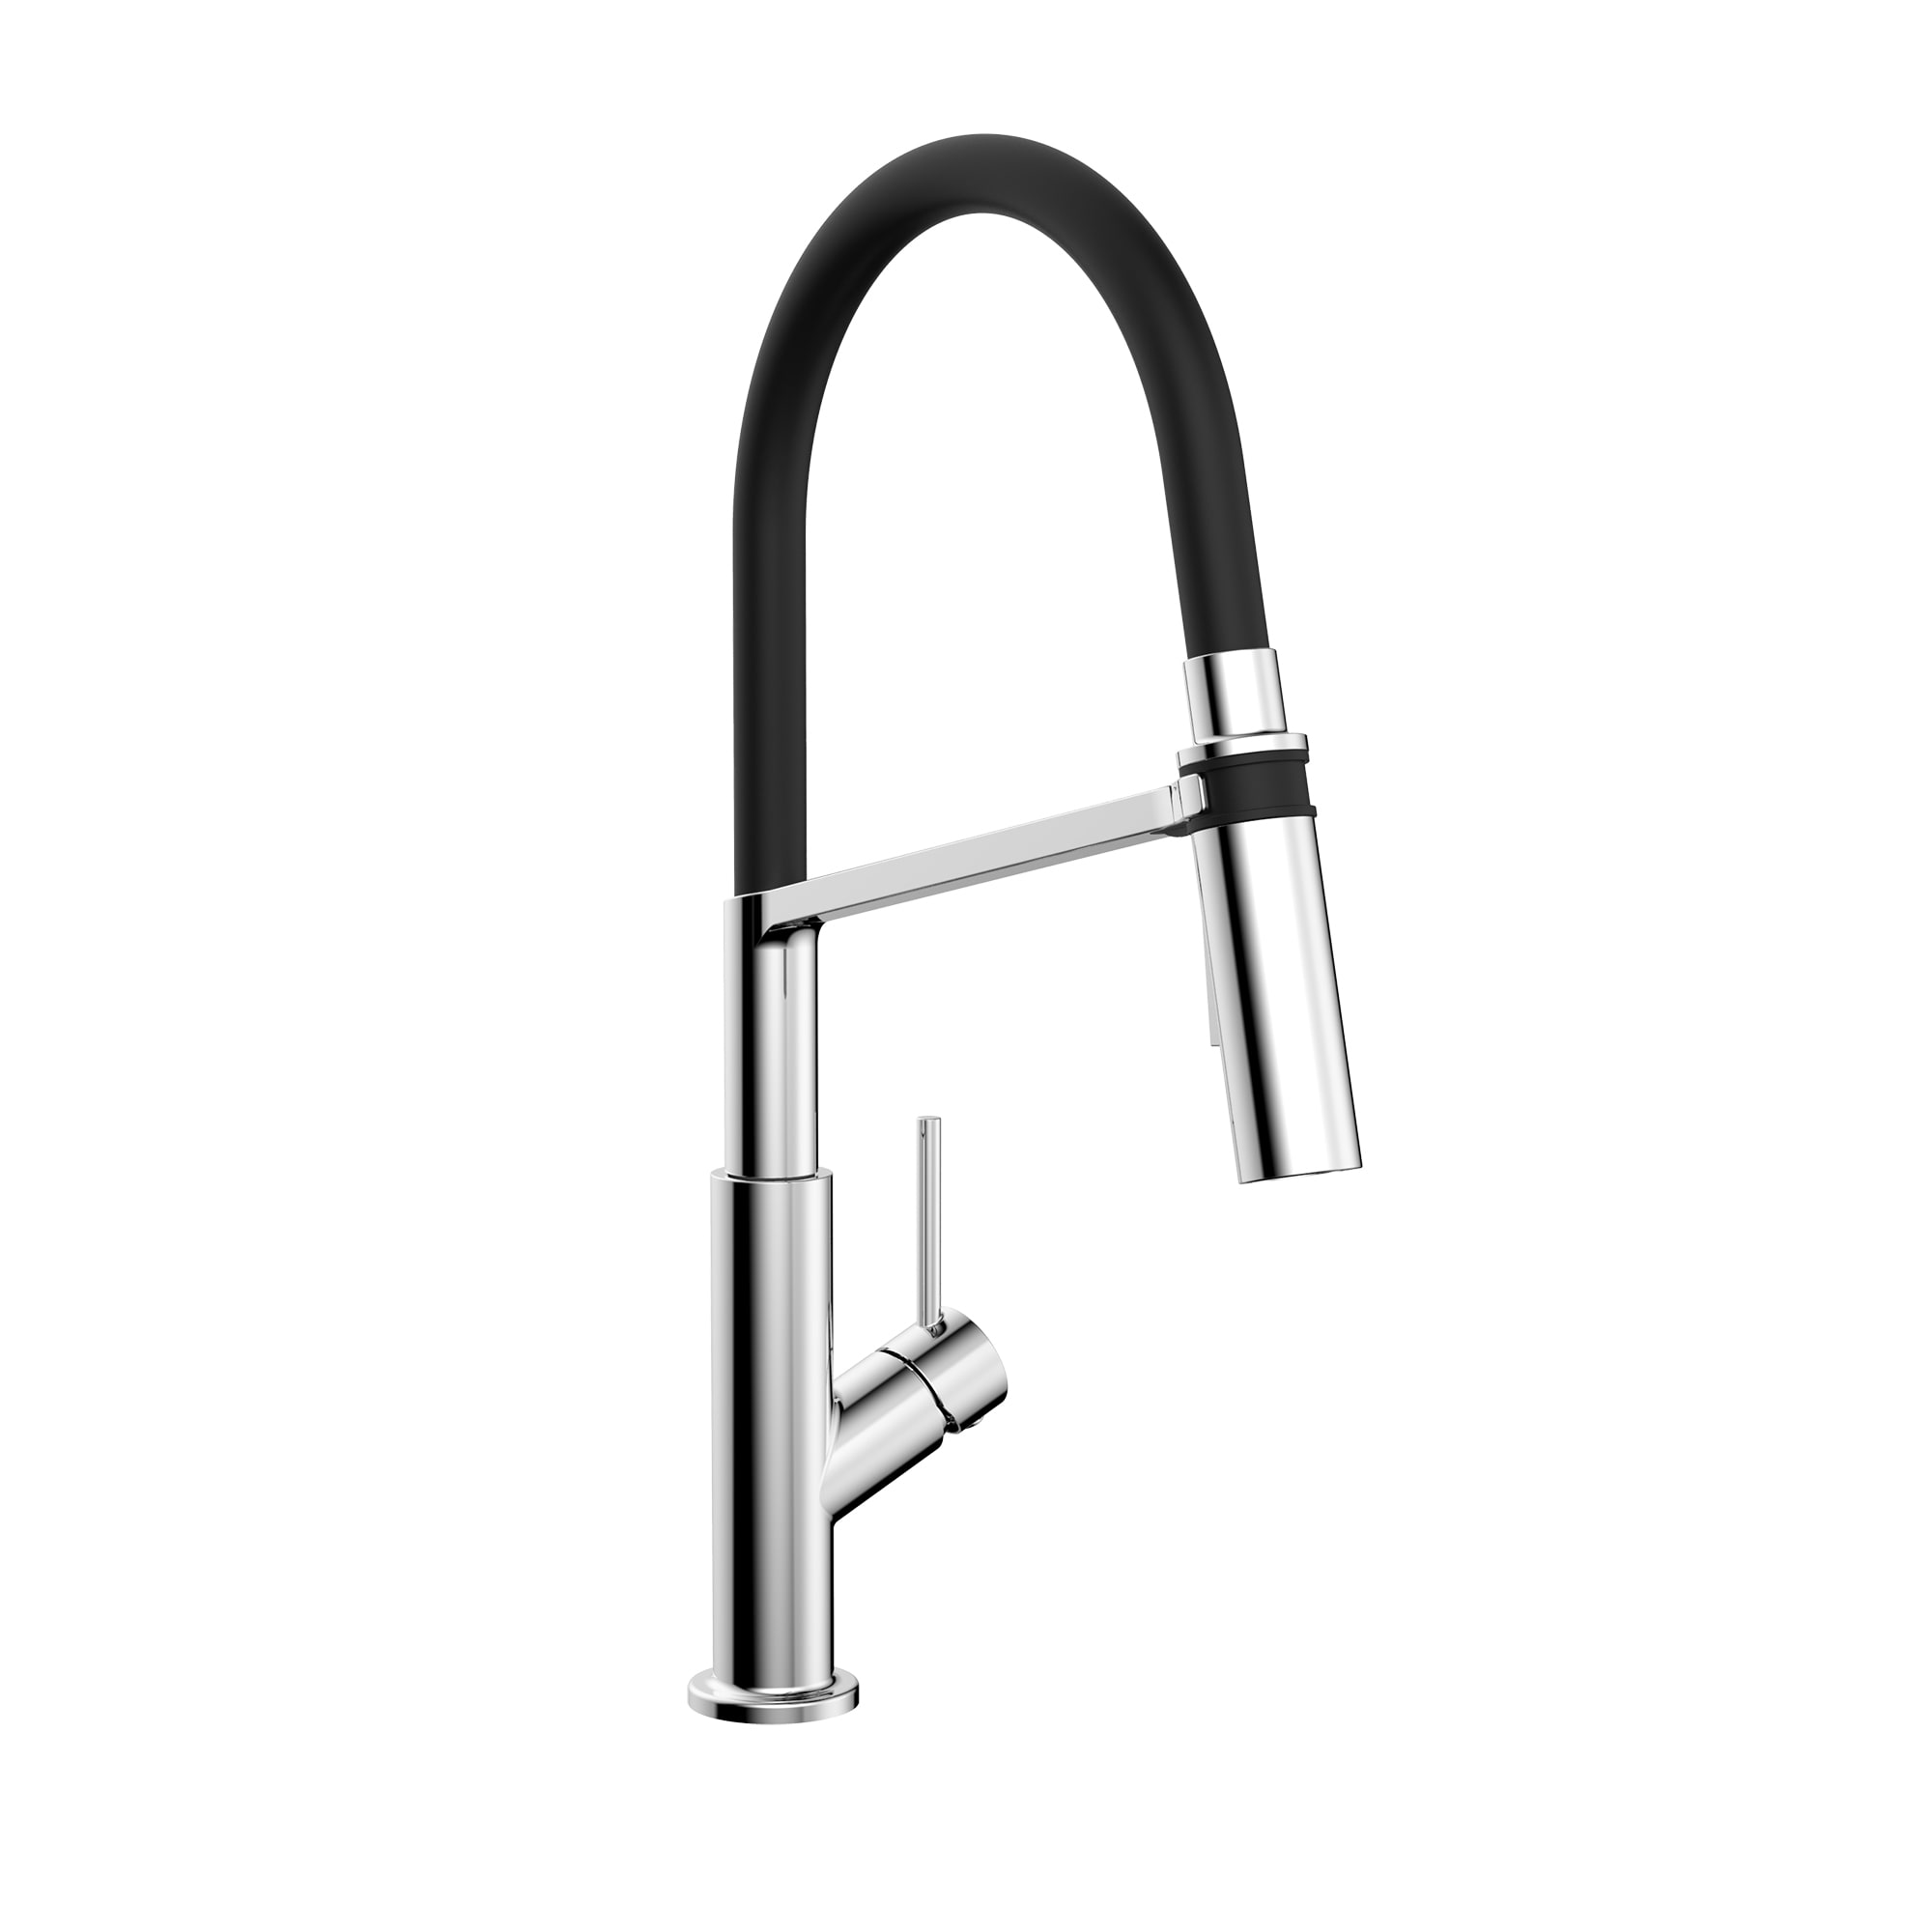 Belanger Magno Chrome Single Handle Pull-down Kitchen Faucet with Sprayer Function (Deck Plate Included)